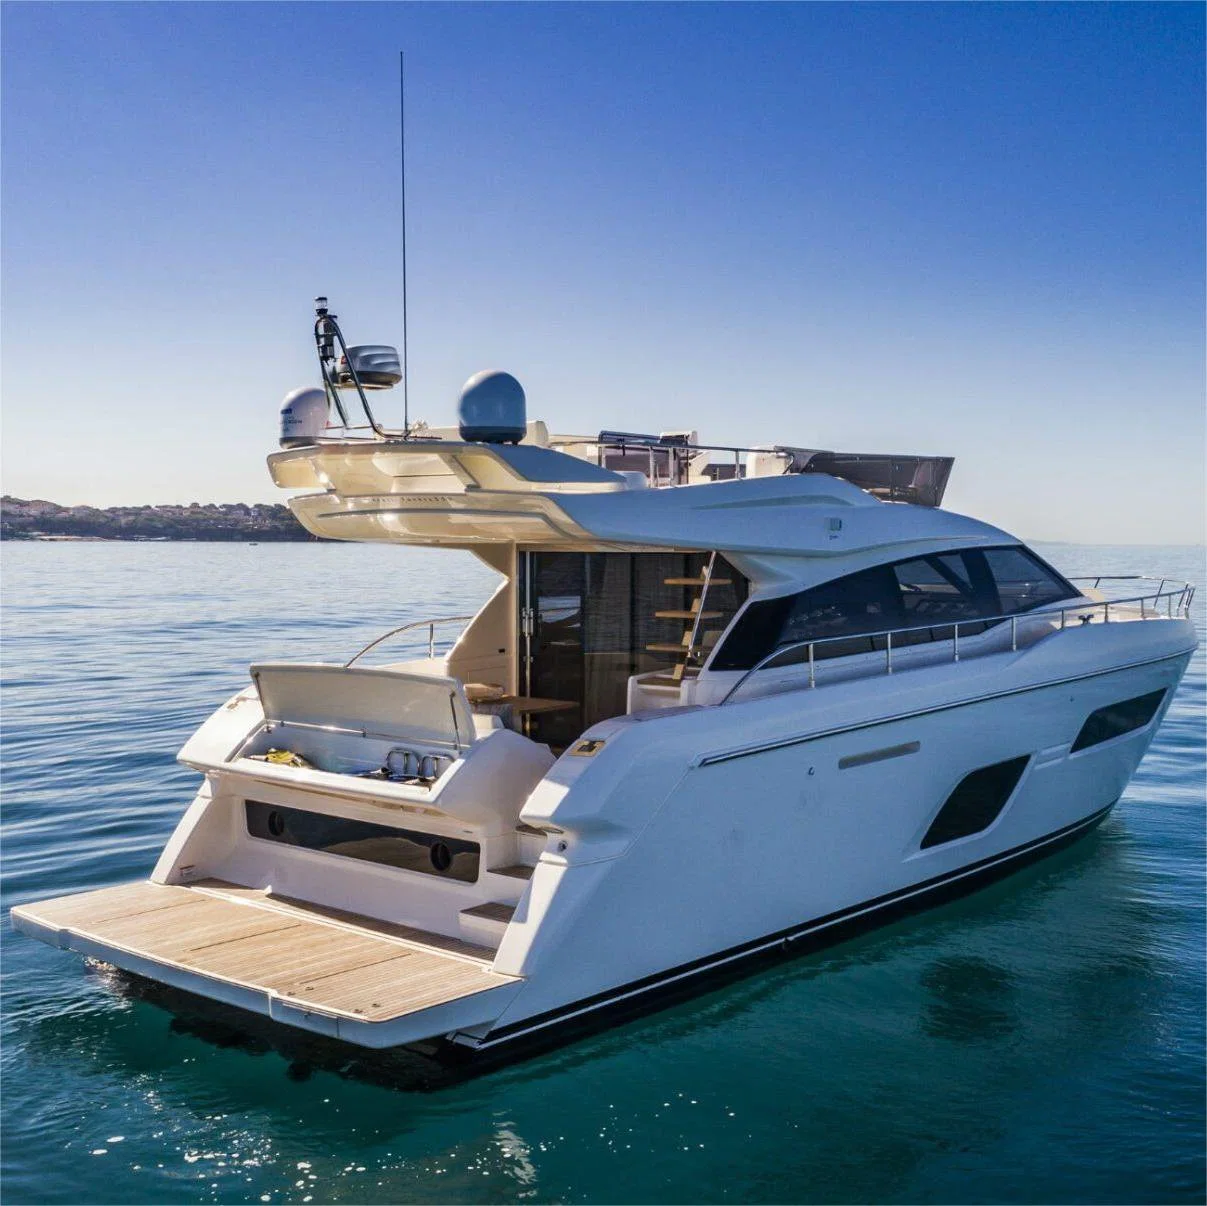 State-of-The-Art High-Quality 14-Meter Yacht with Voice-Activated Controls